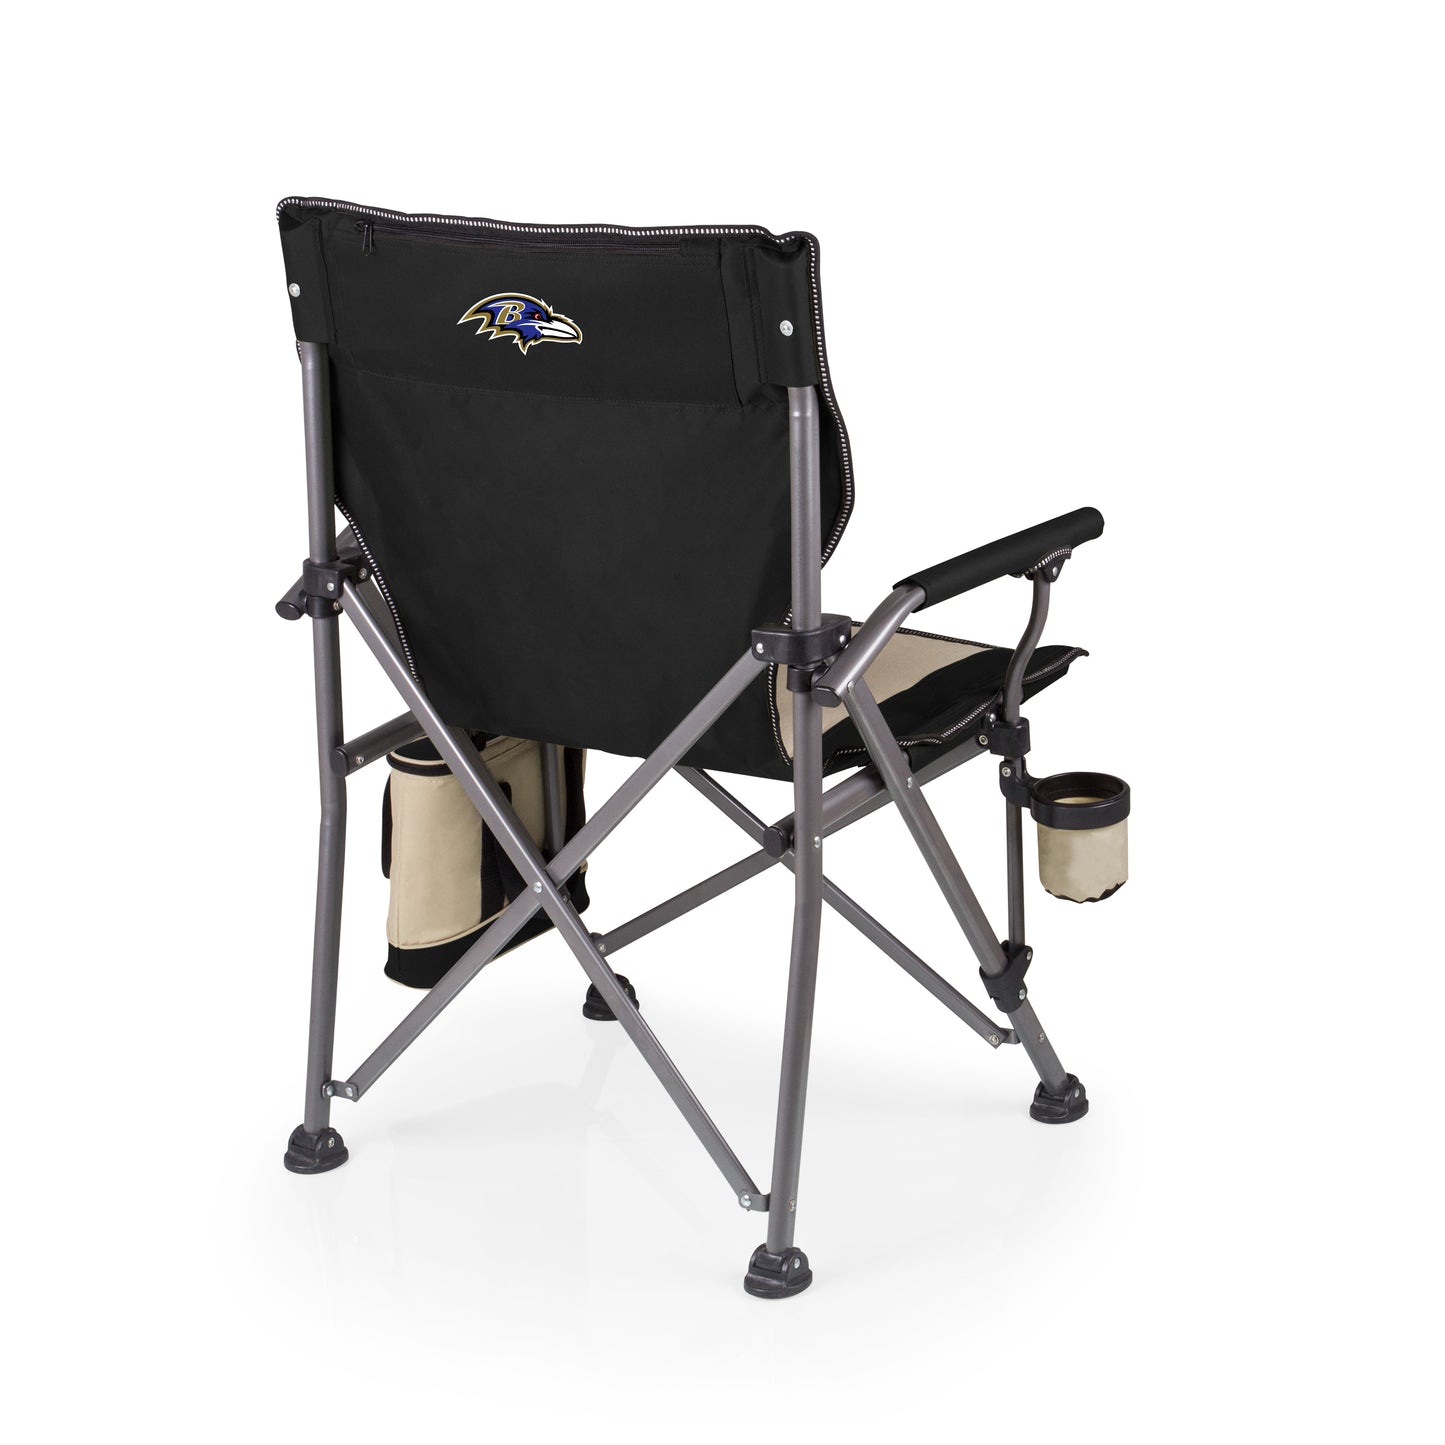 Baltimore Ravens - Outlander Folding Camping Chair with Cooler